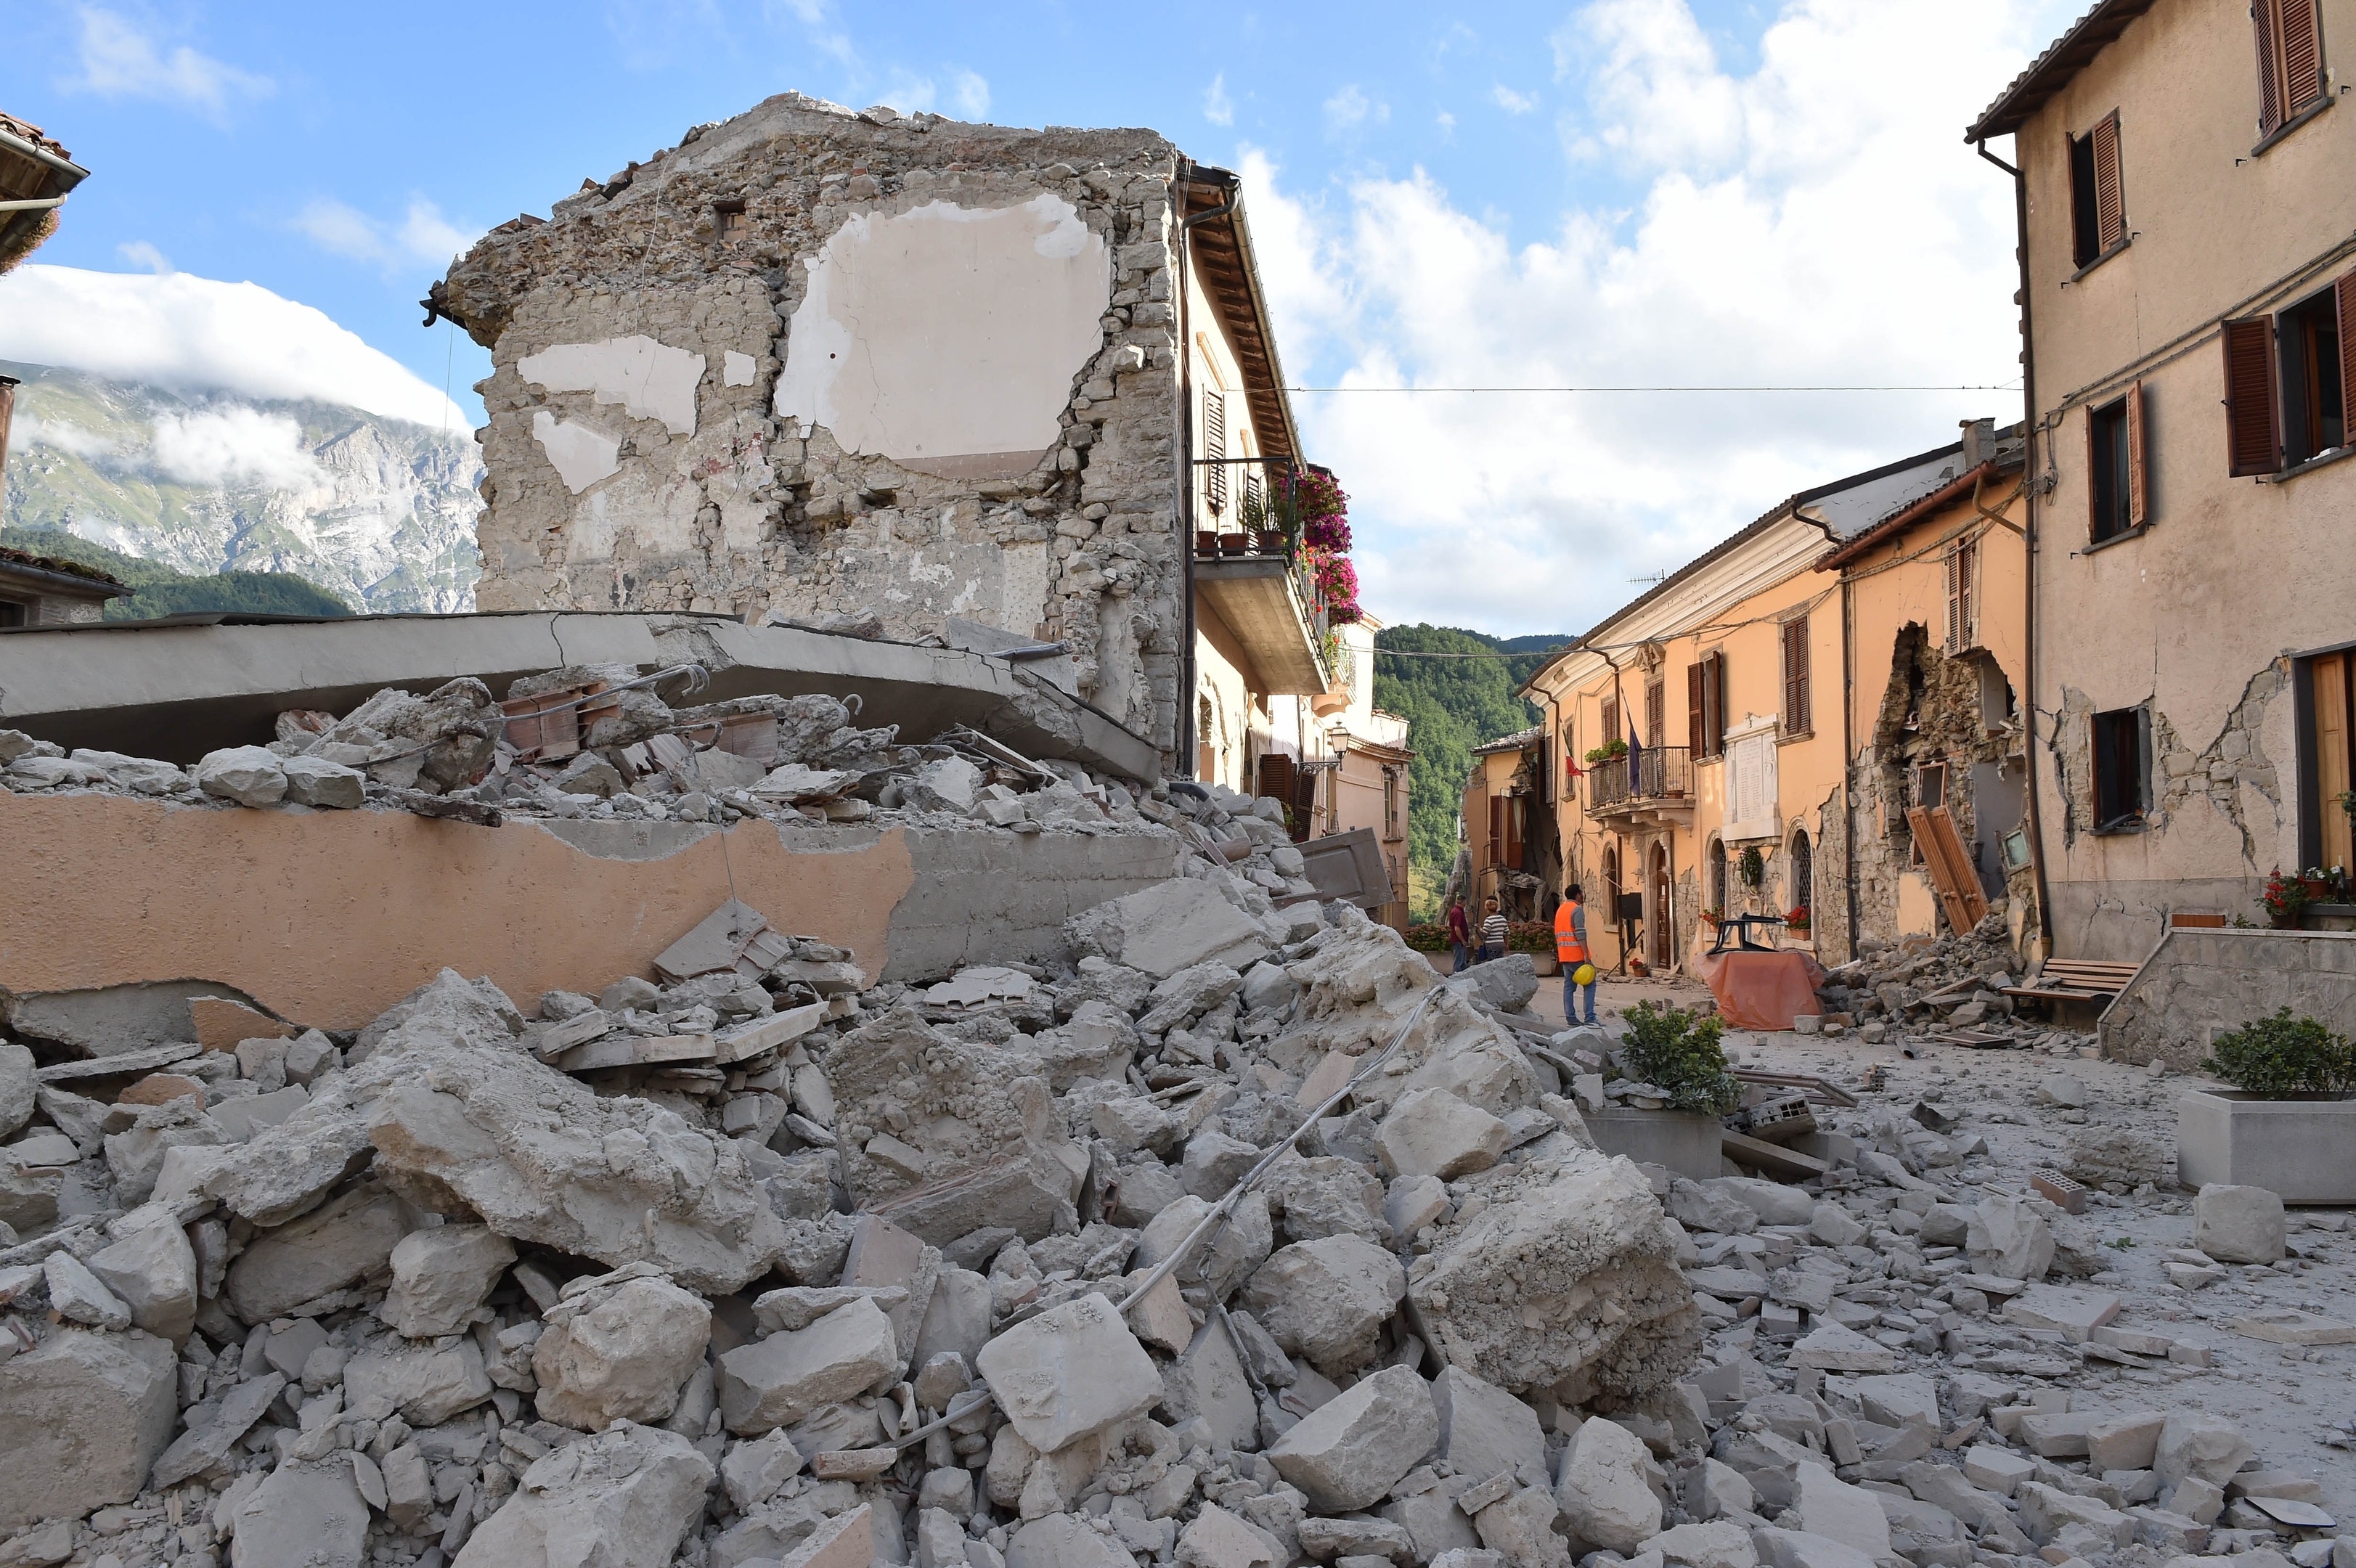 *** BESTPIX *** Magnitude 6.2 Earthquake In Central Italy Kill At Least 38